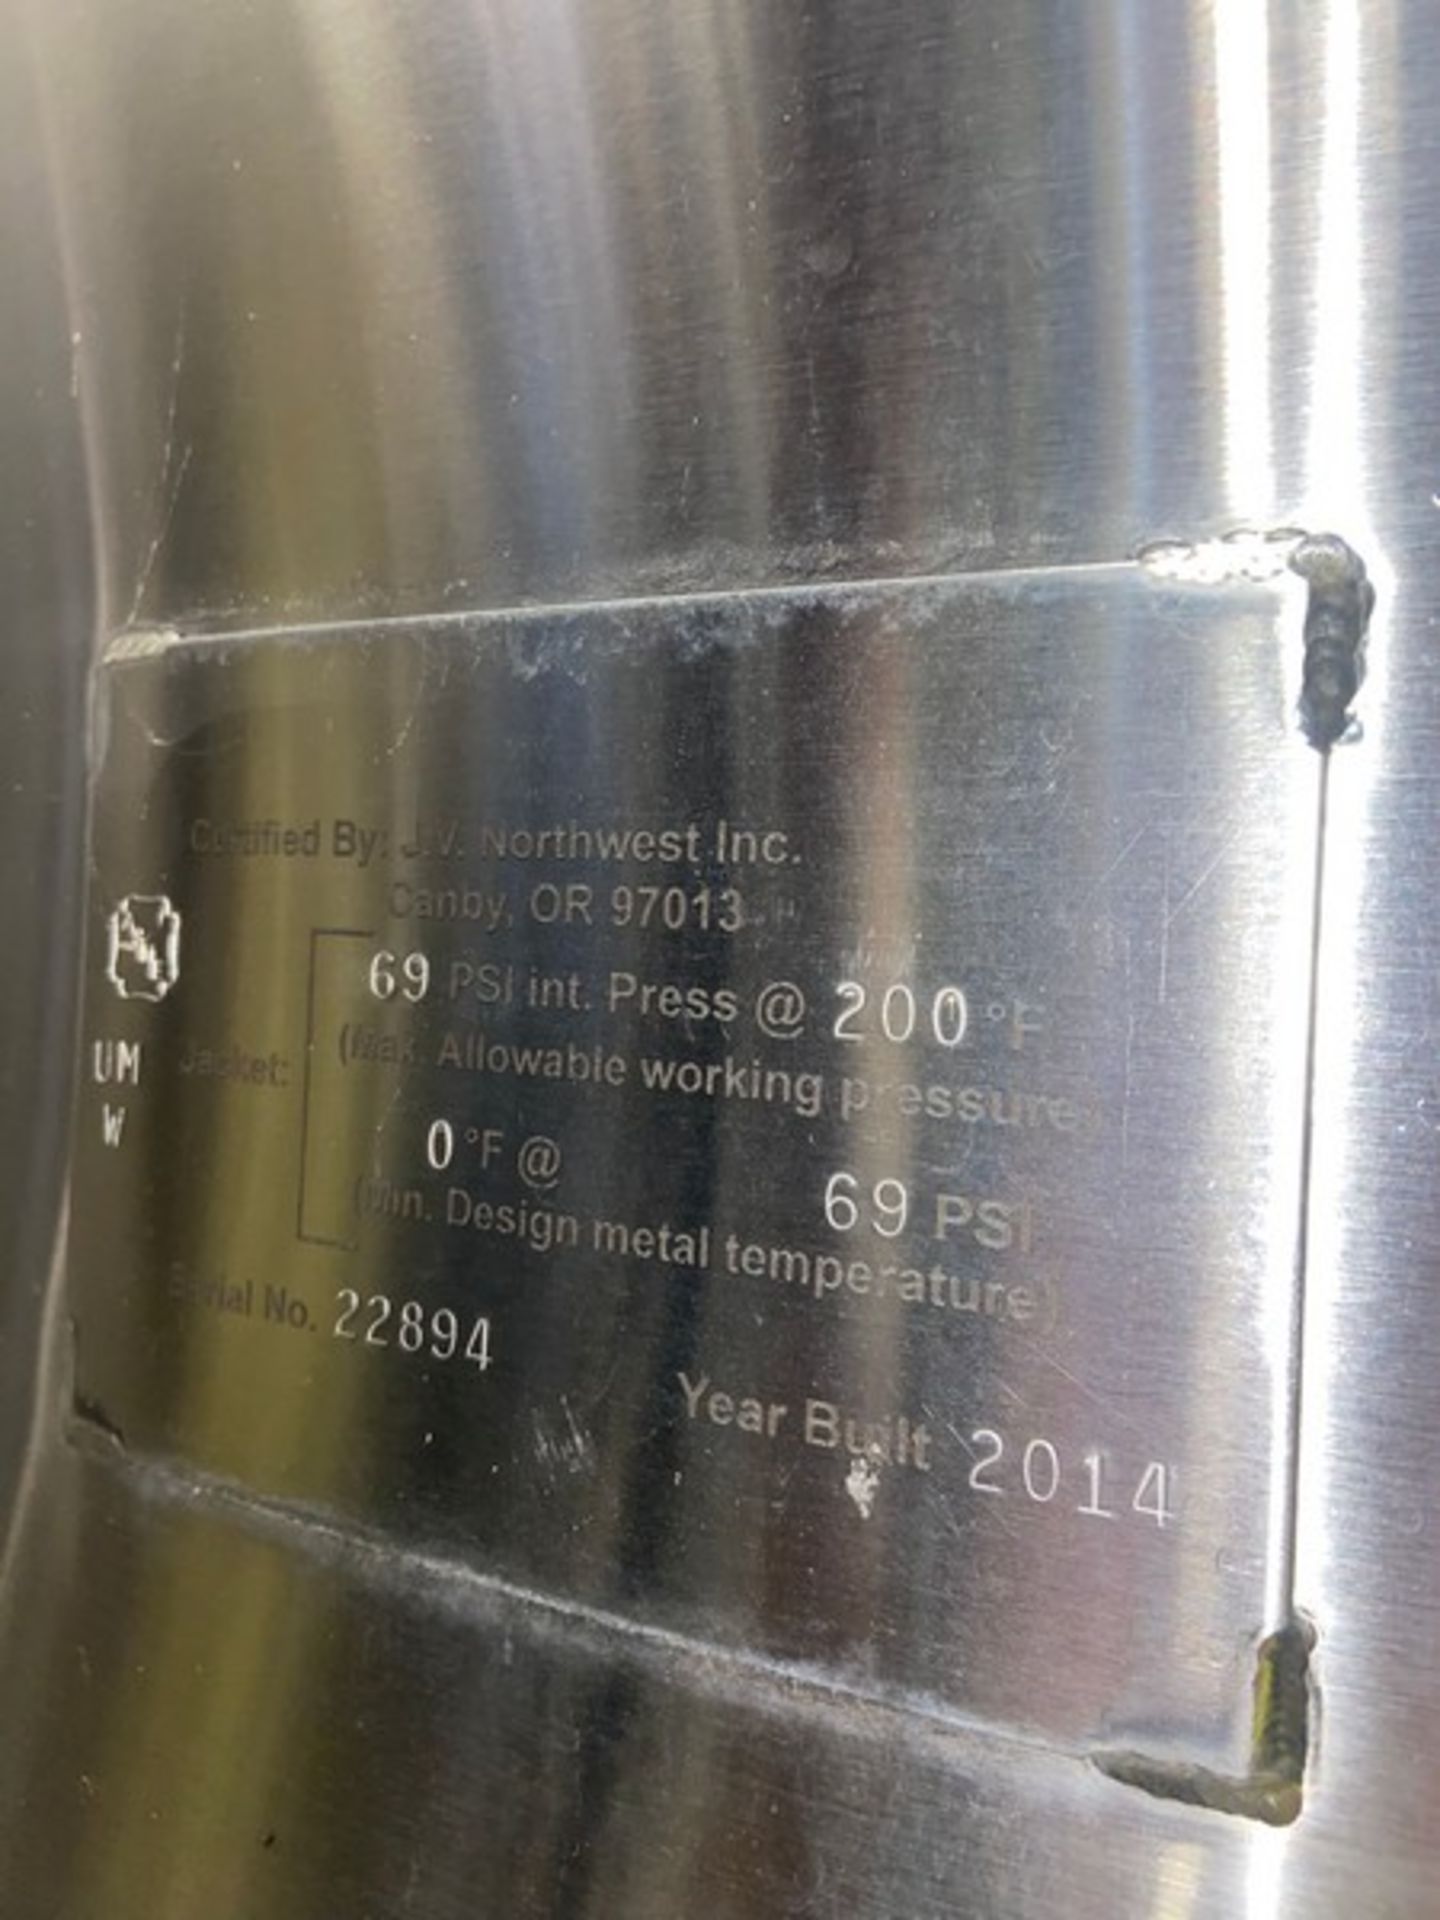 2014 JVNW 15 BBL (465 GAL.) S/S Jacketed Vertical Tank, S/N 22894, 69 PSI Int. Press @ 200 F, 0 F @ - Image 9 of 13